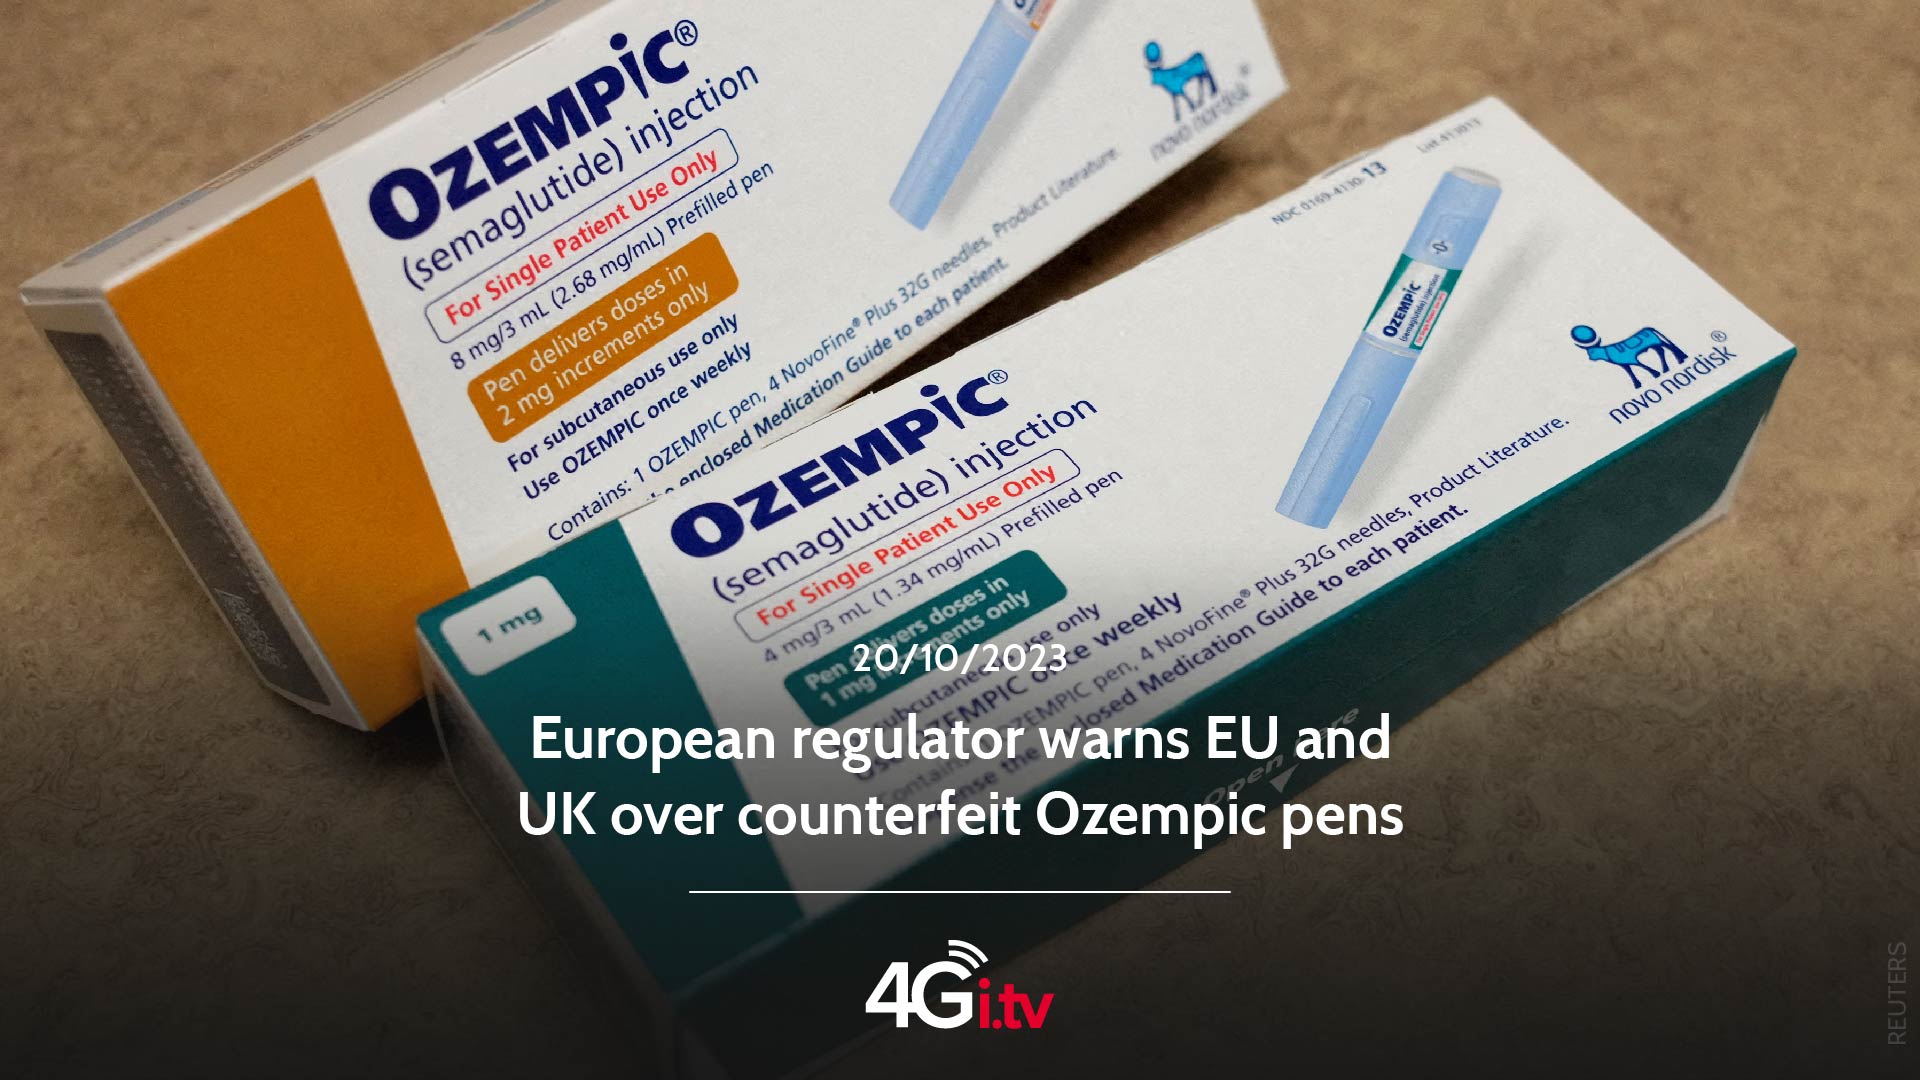 Read more about the article European regulator warns EU and UK over counterfeit Ozempic pens